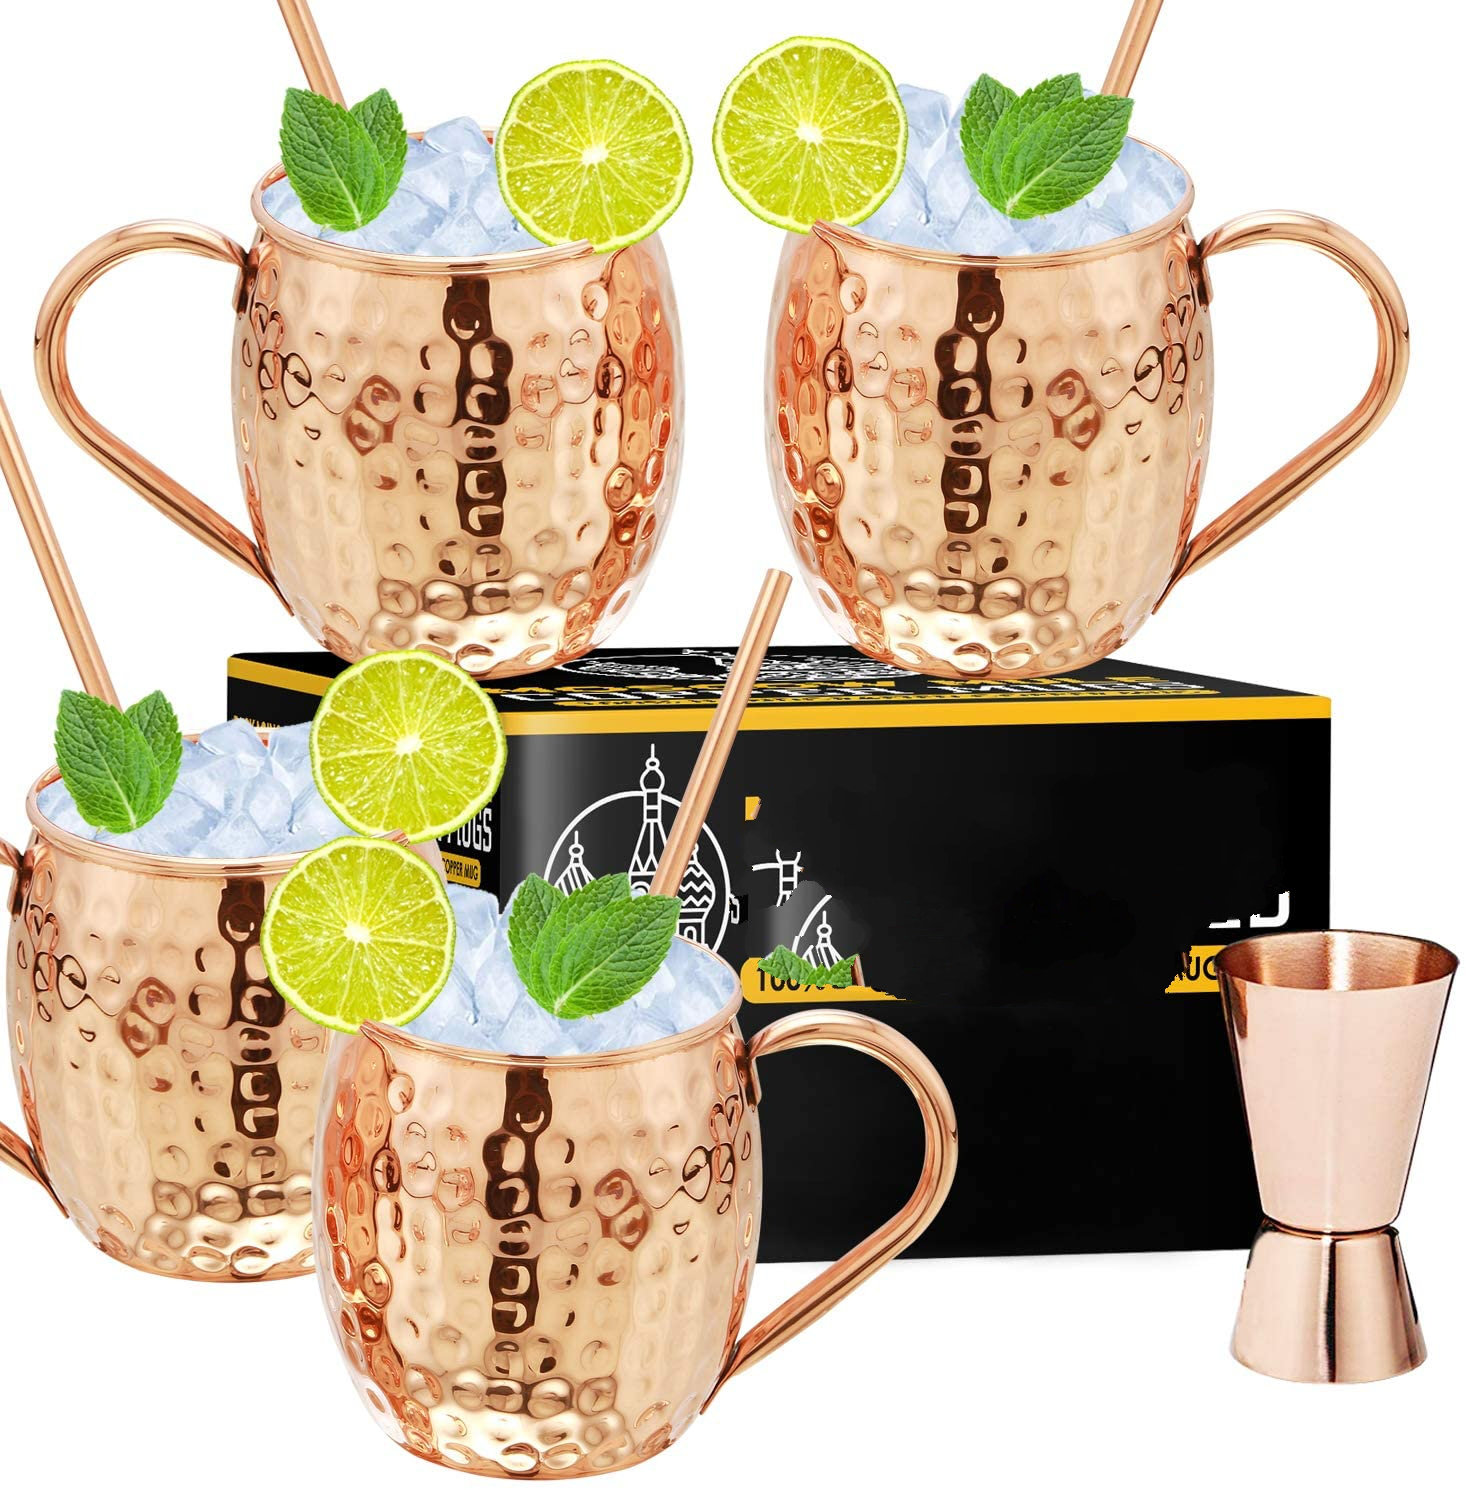 MOSCOW MULE COPPER MUGS Set of 2 100% HANDCRAFTED Food Safe Pure Solid Copper 